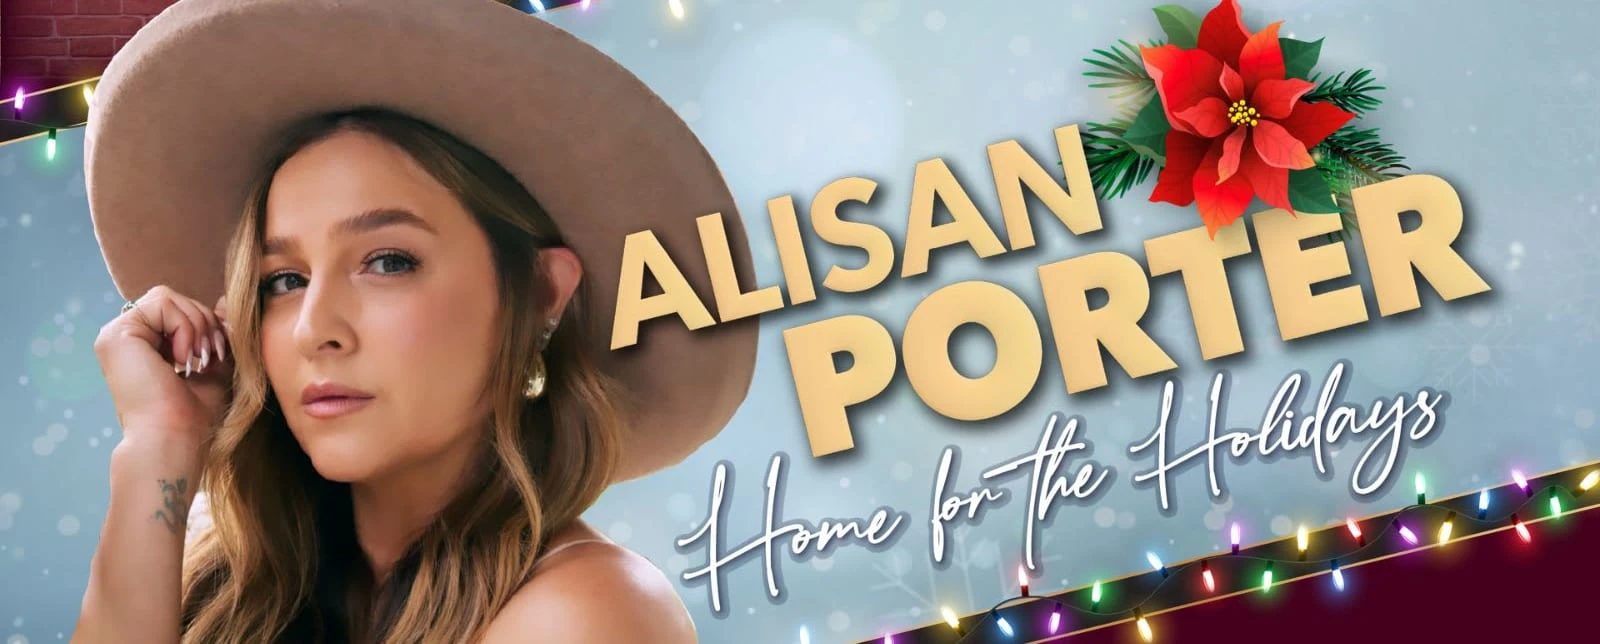 Alisan Porter: Home For The Holidays: What to expect - 1